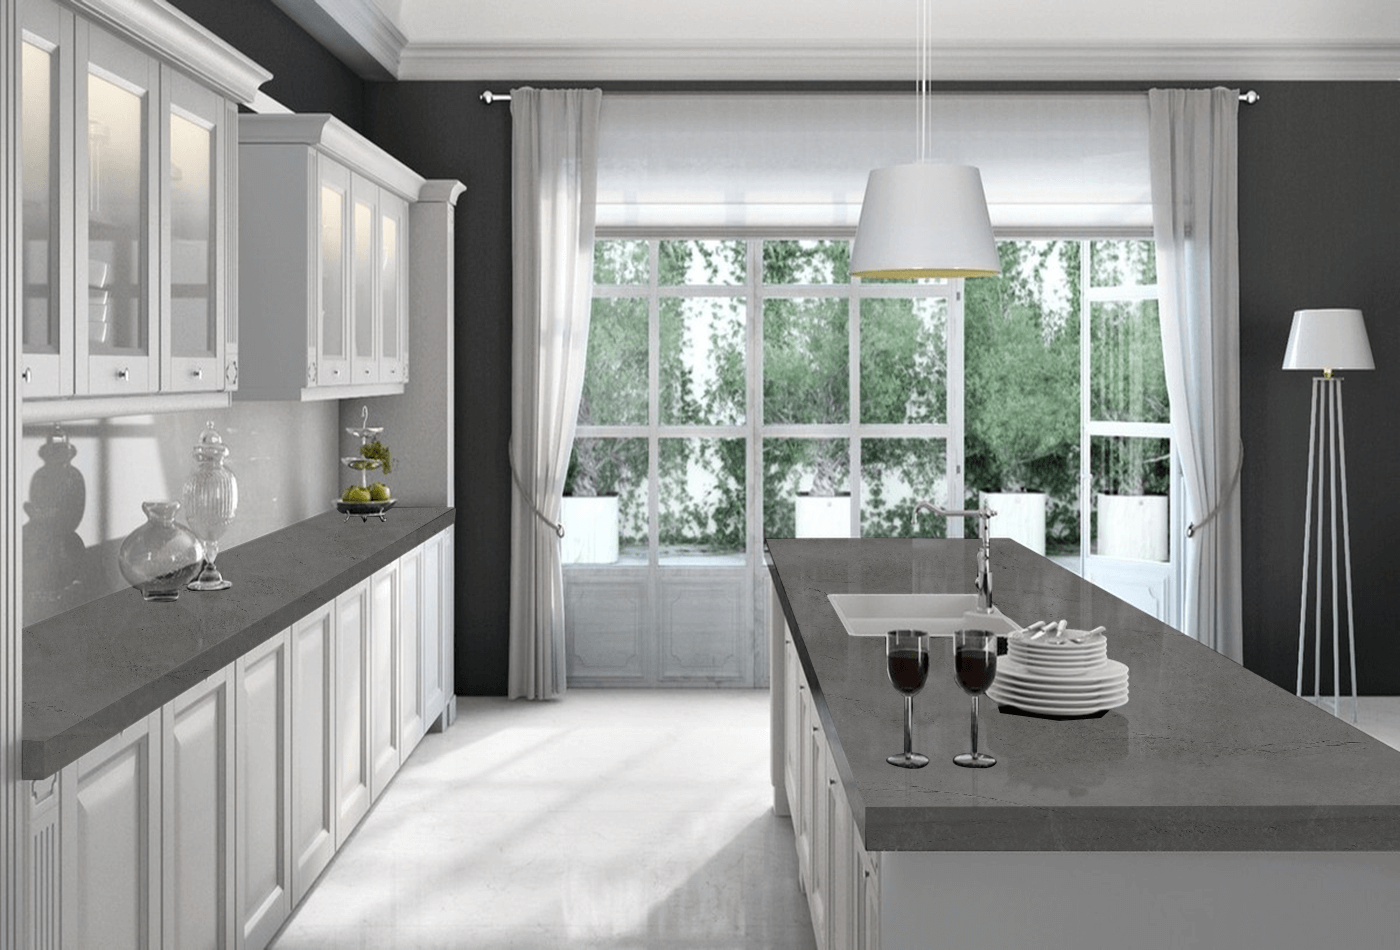 Top Points in the Popularity of Porcelain Countertops